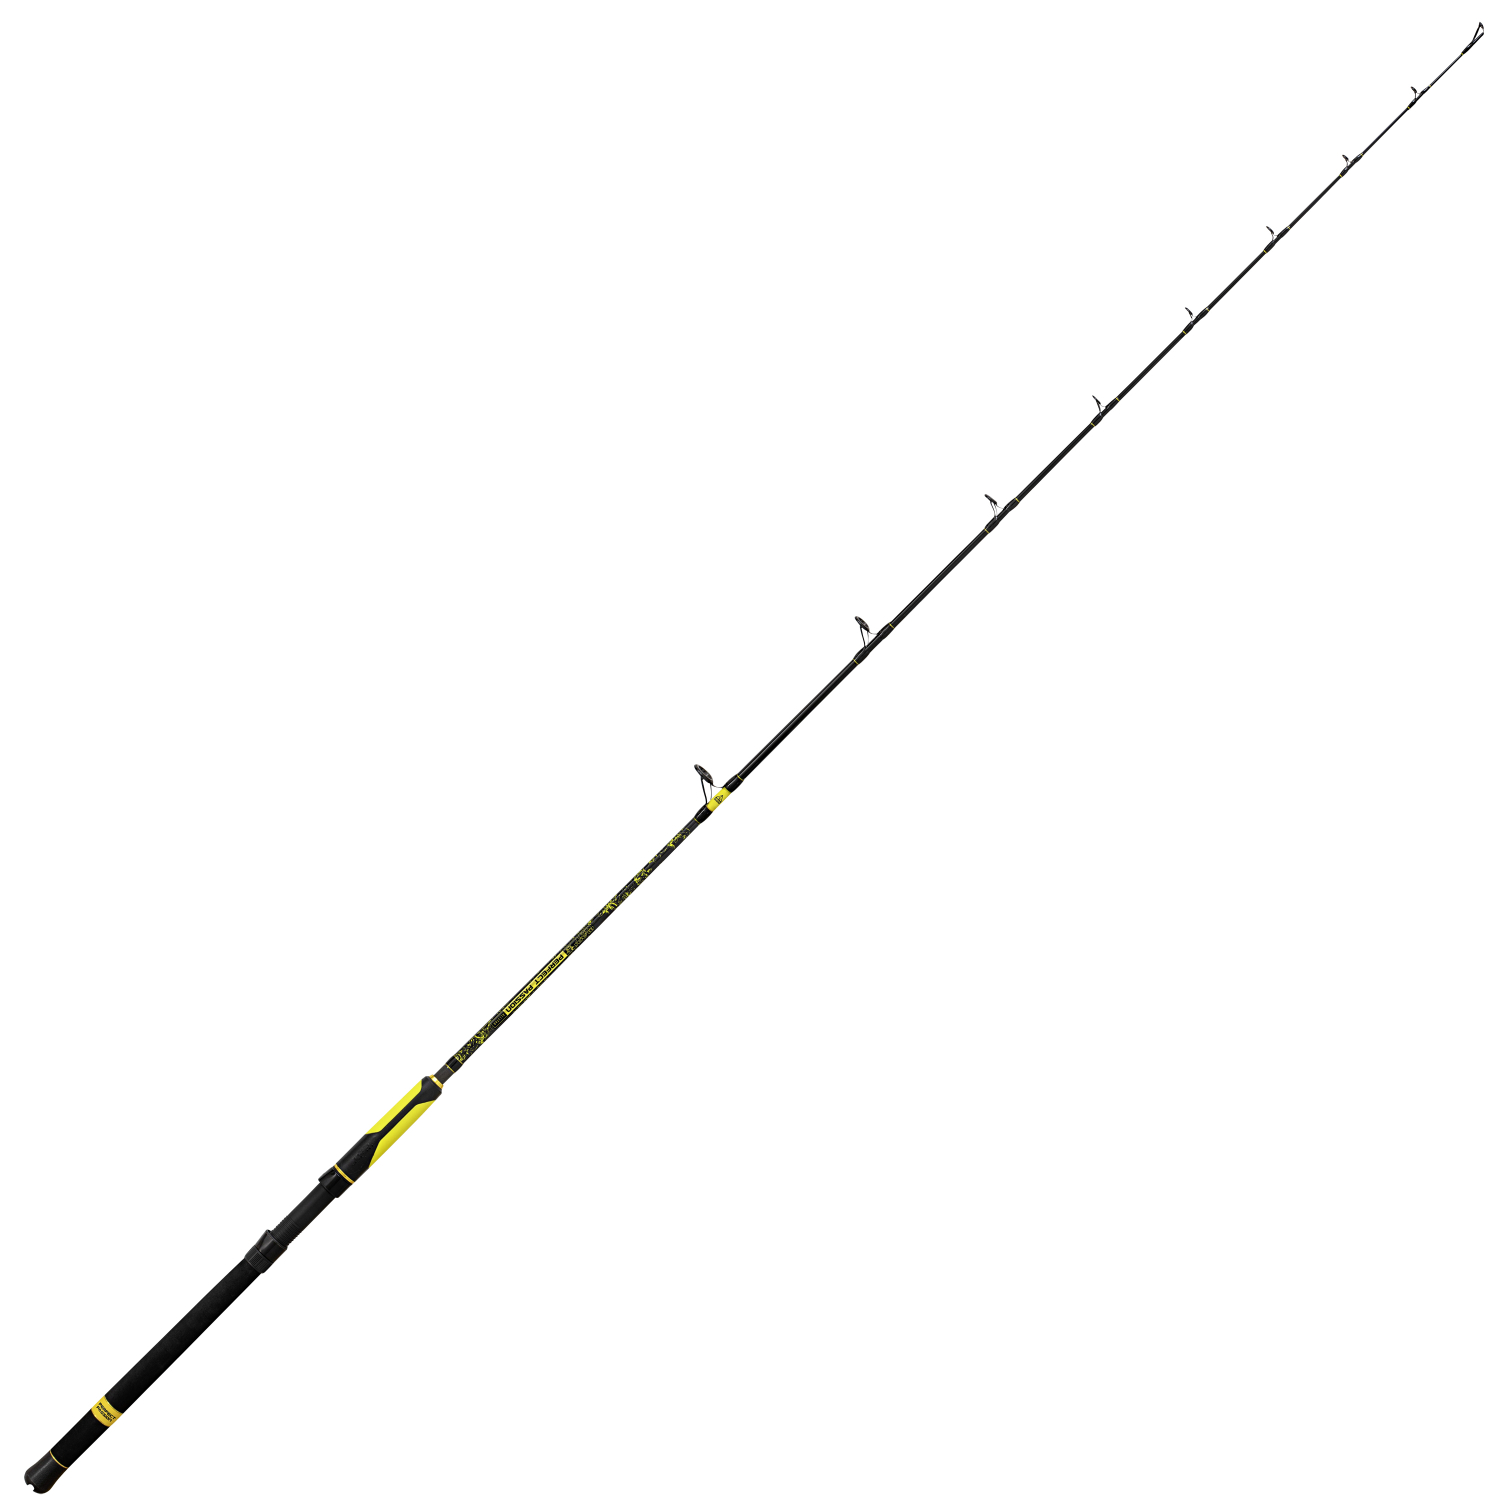 Black Cat Fishing Rod Perfect Passion Allstar at low prices